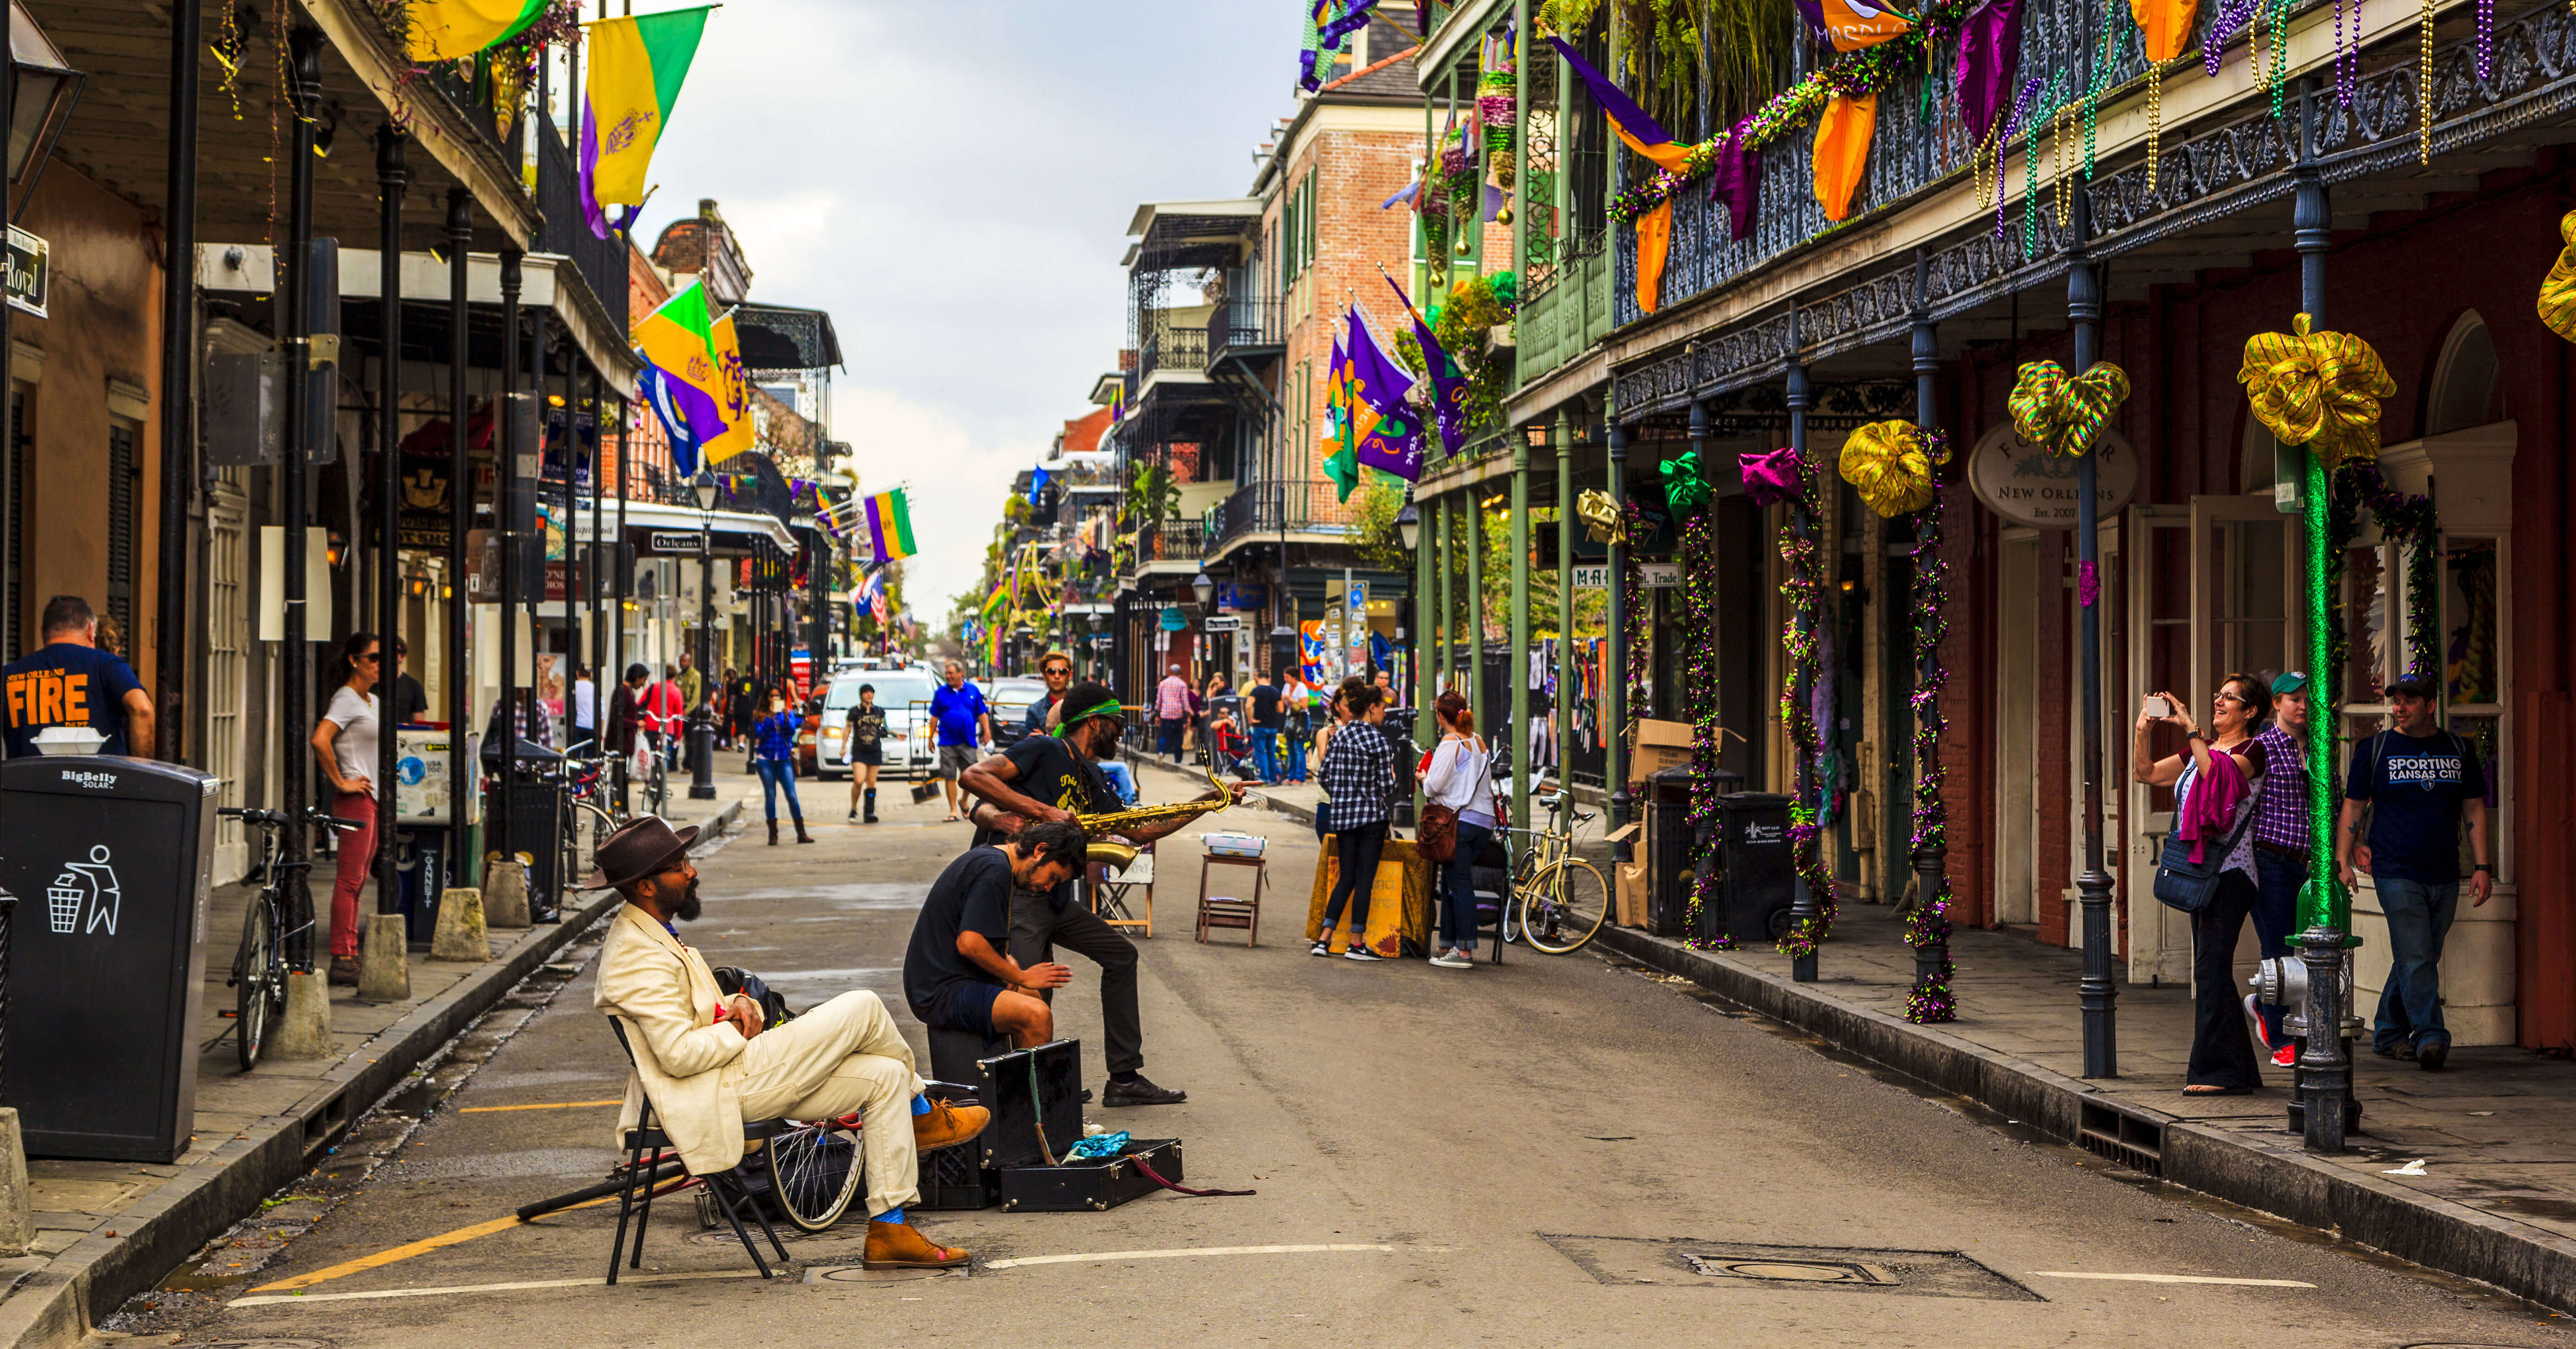 The 5 New Orleans festivals you need to experience